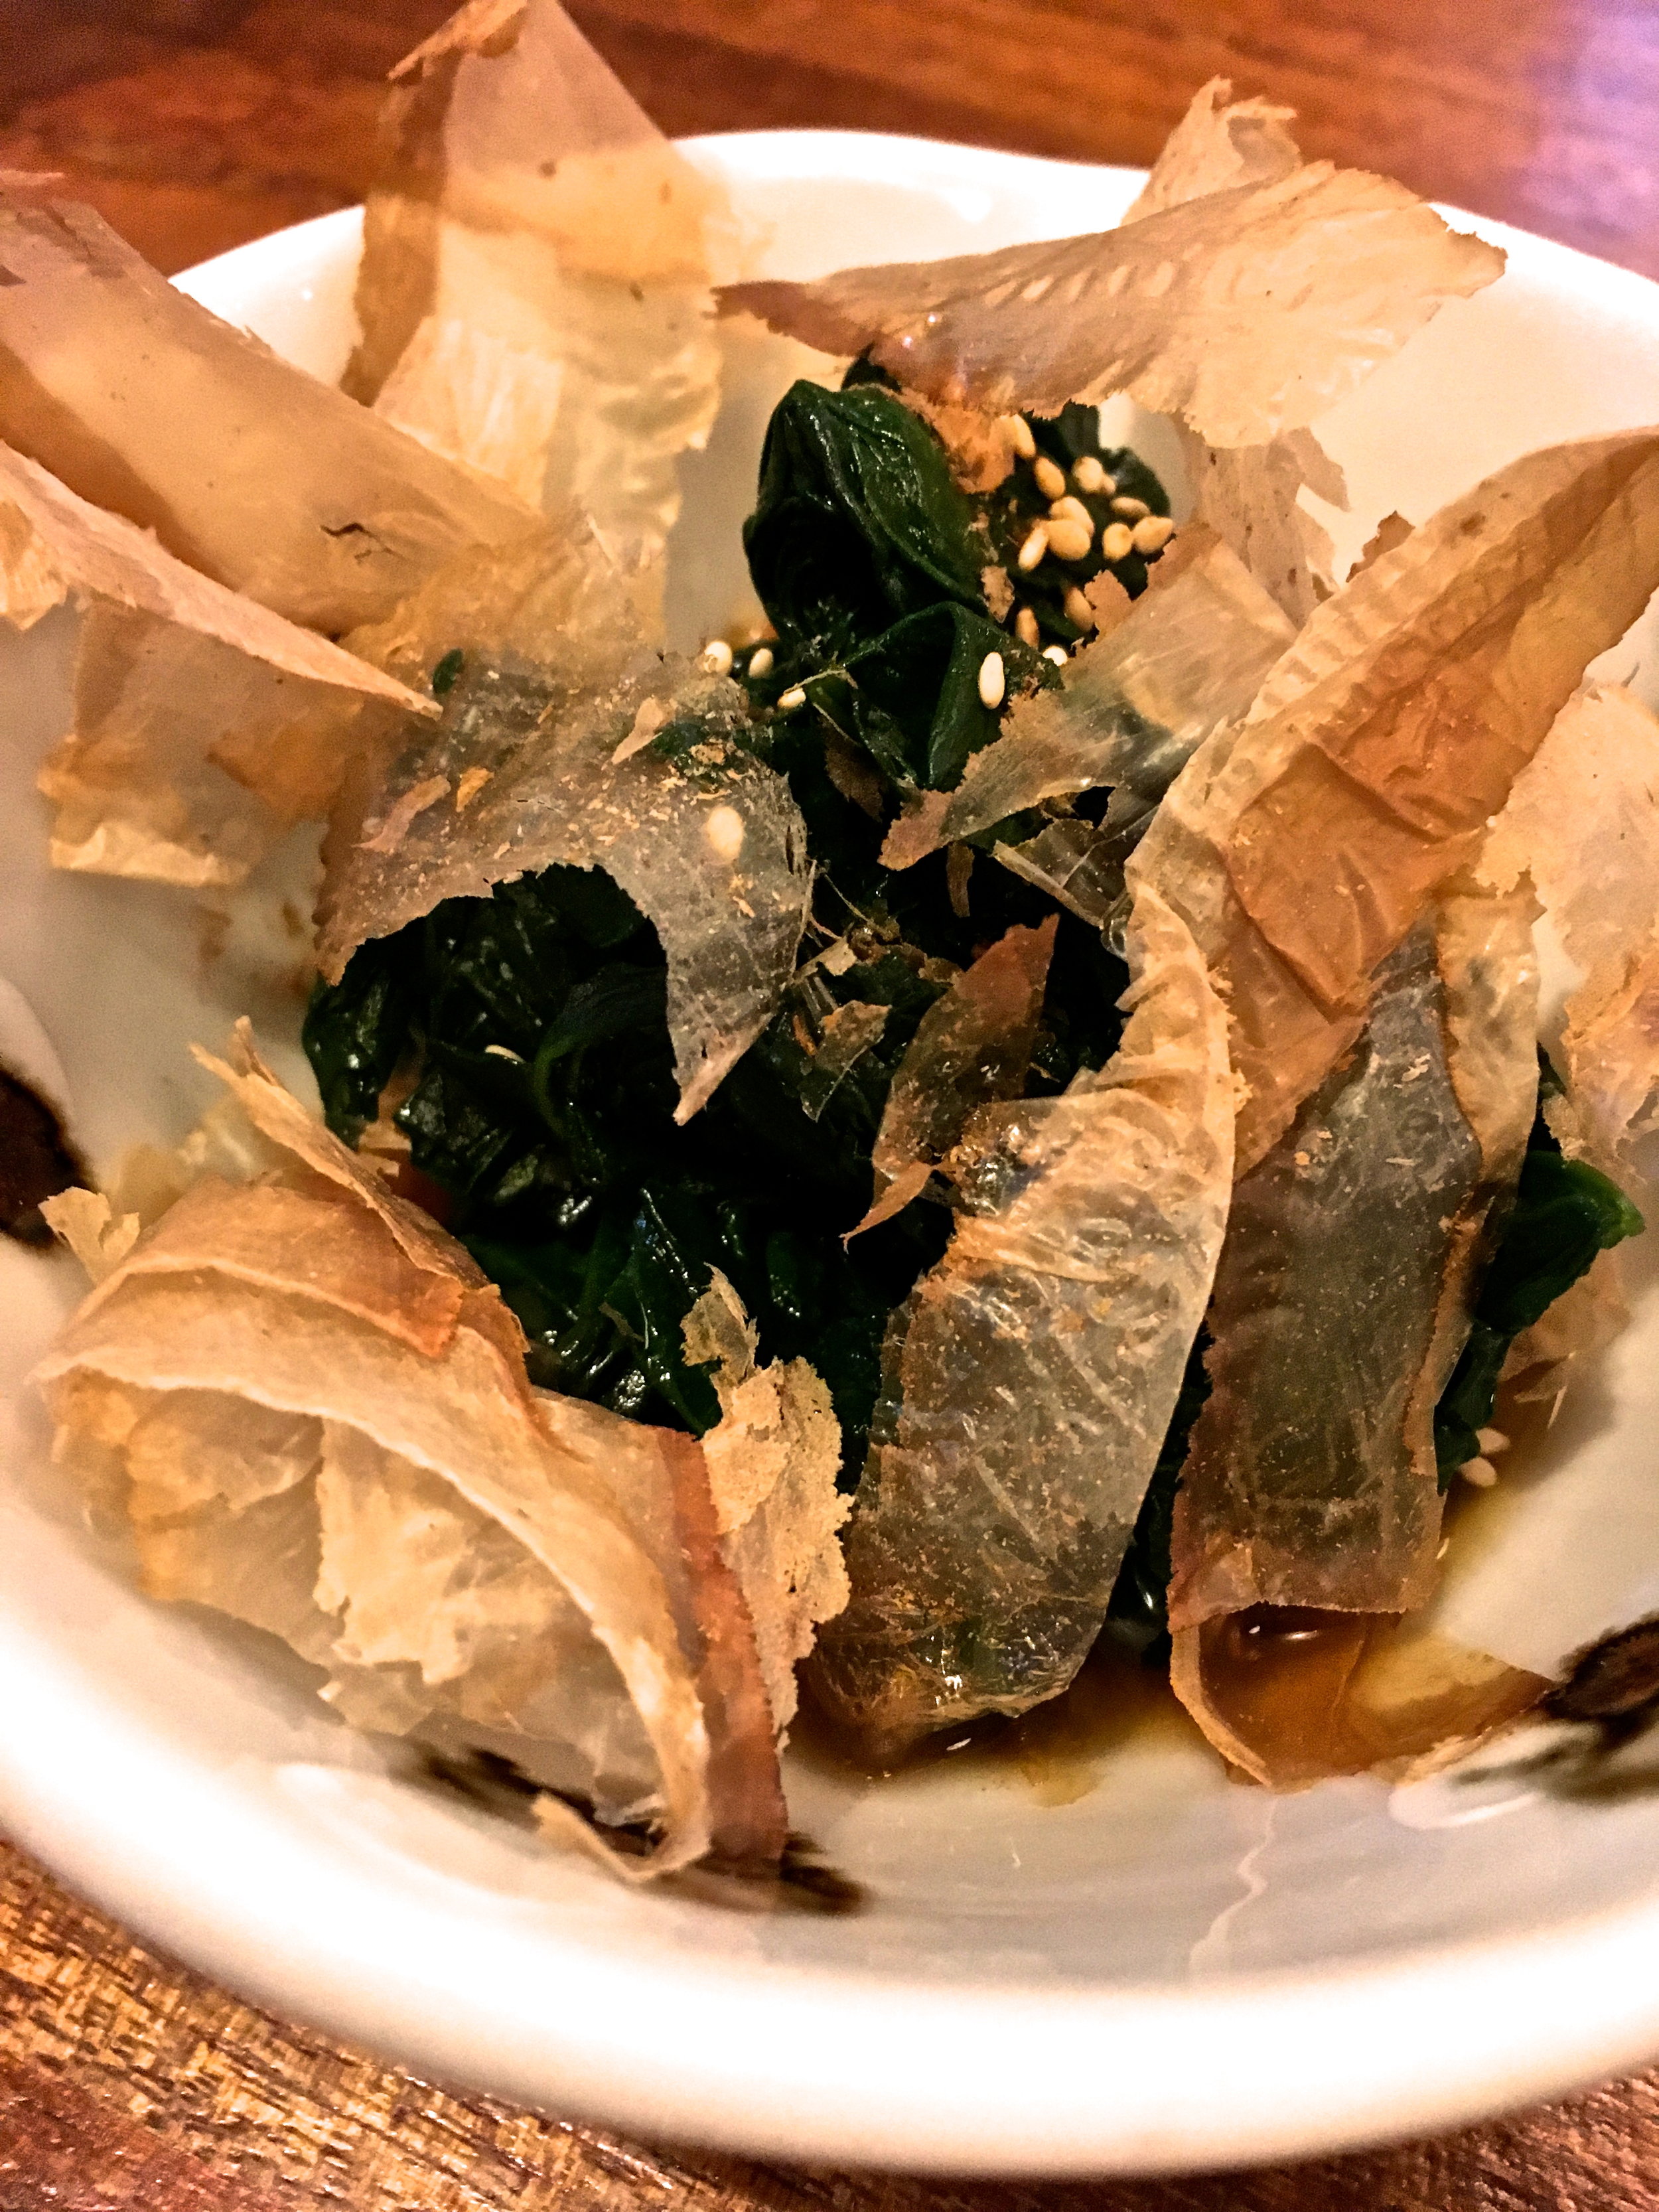 Spinach with bonito flakes